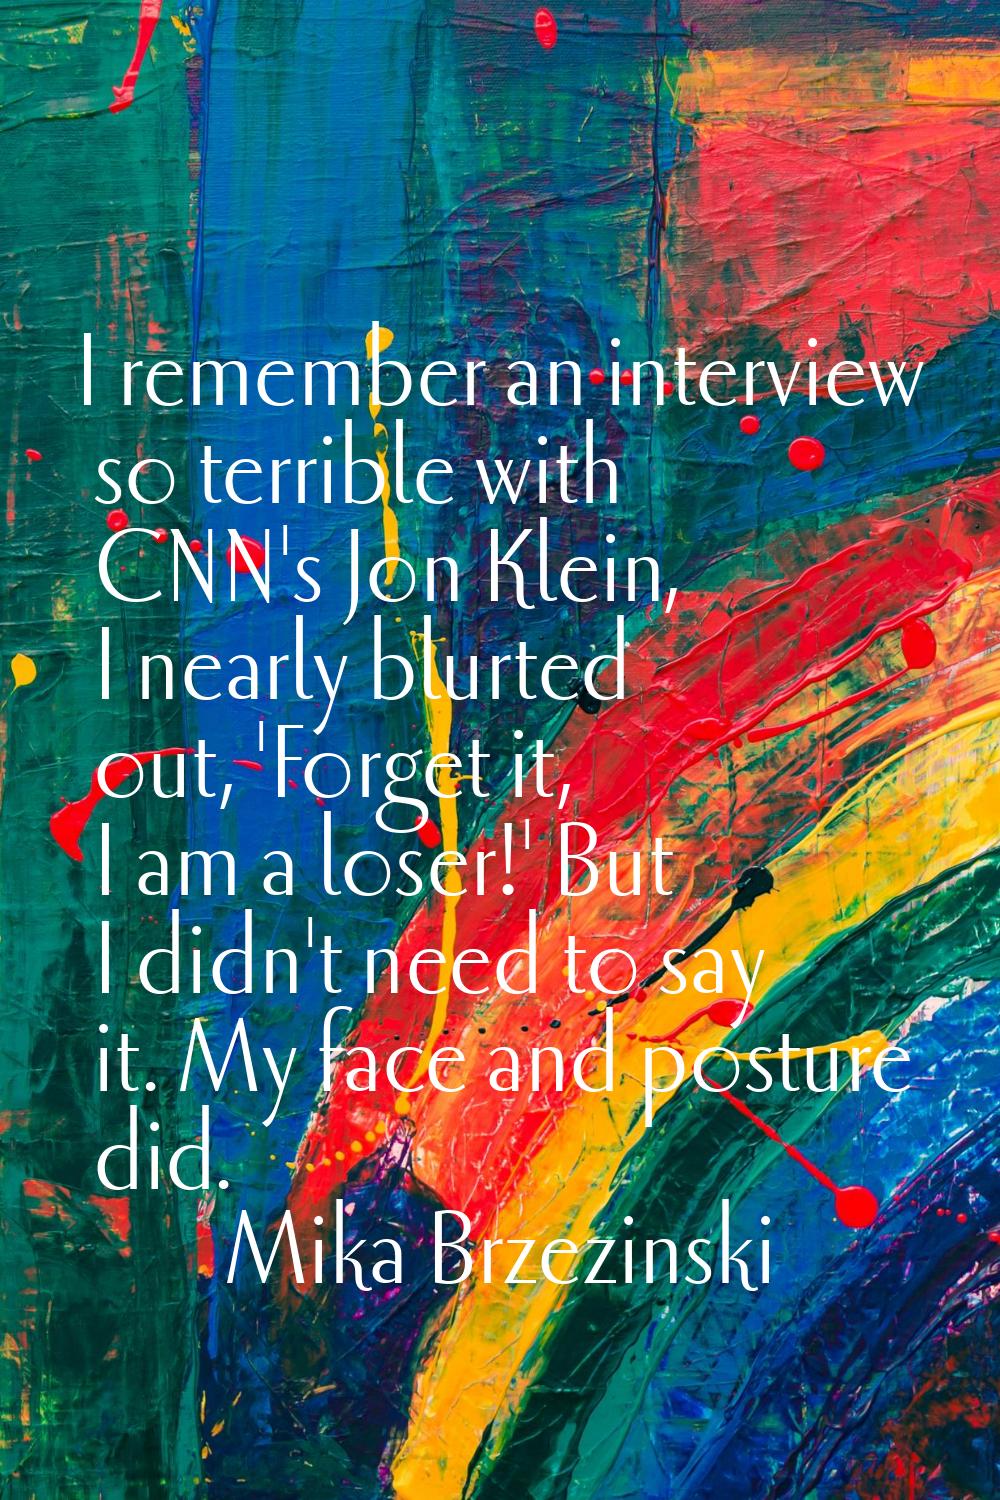 I remember an interview so terrible with CNN's Jon Klein, I nearly blurted out, 'Forget it, I am a 